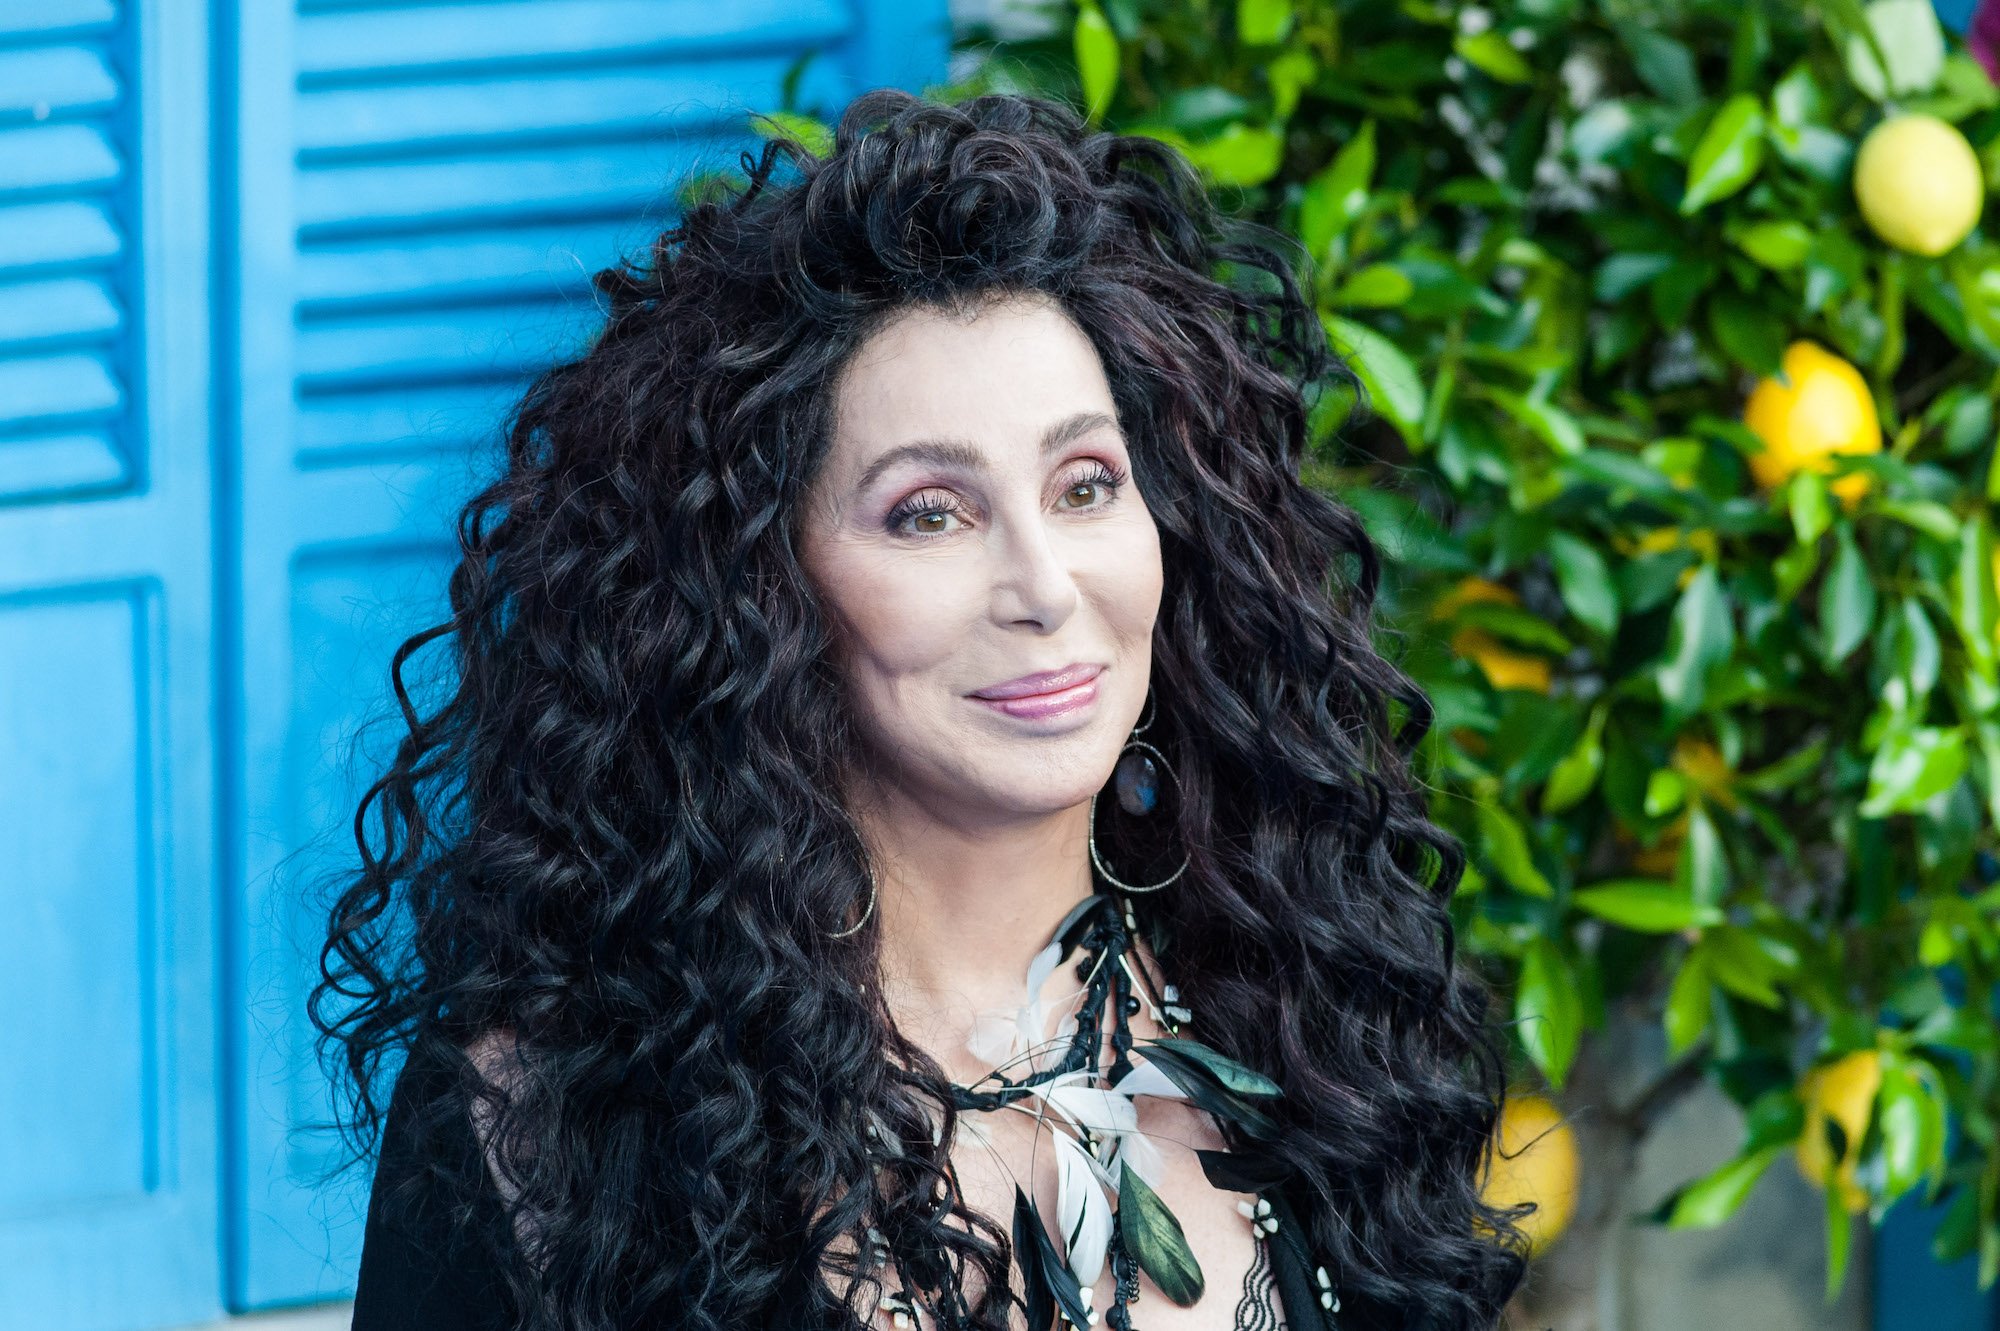 Cher smiling in front of a blue background